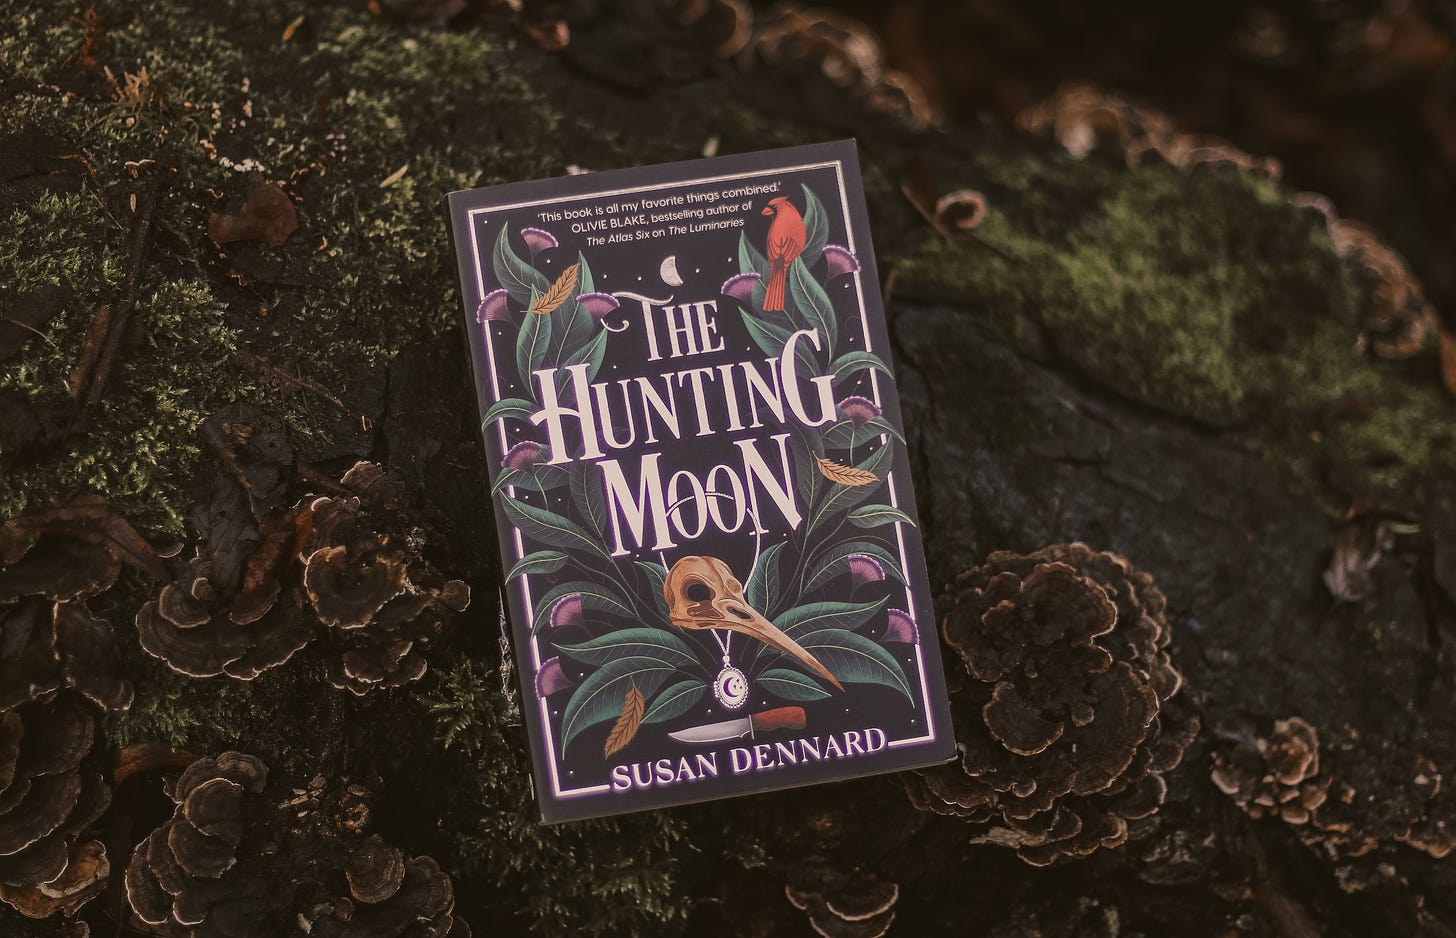 A photograph of the UK edition of The Hunting Moon against a backdrop of moss and wood